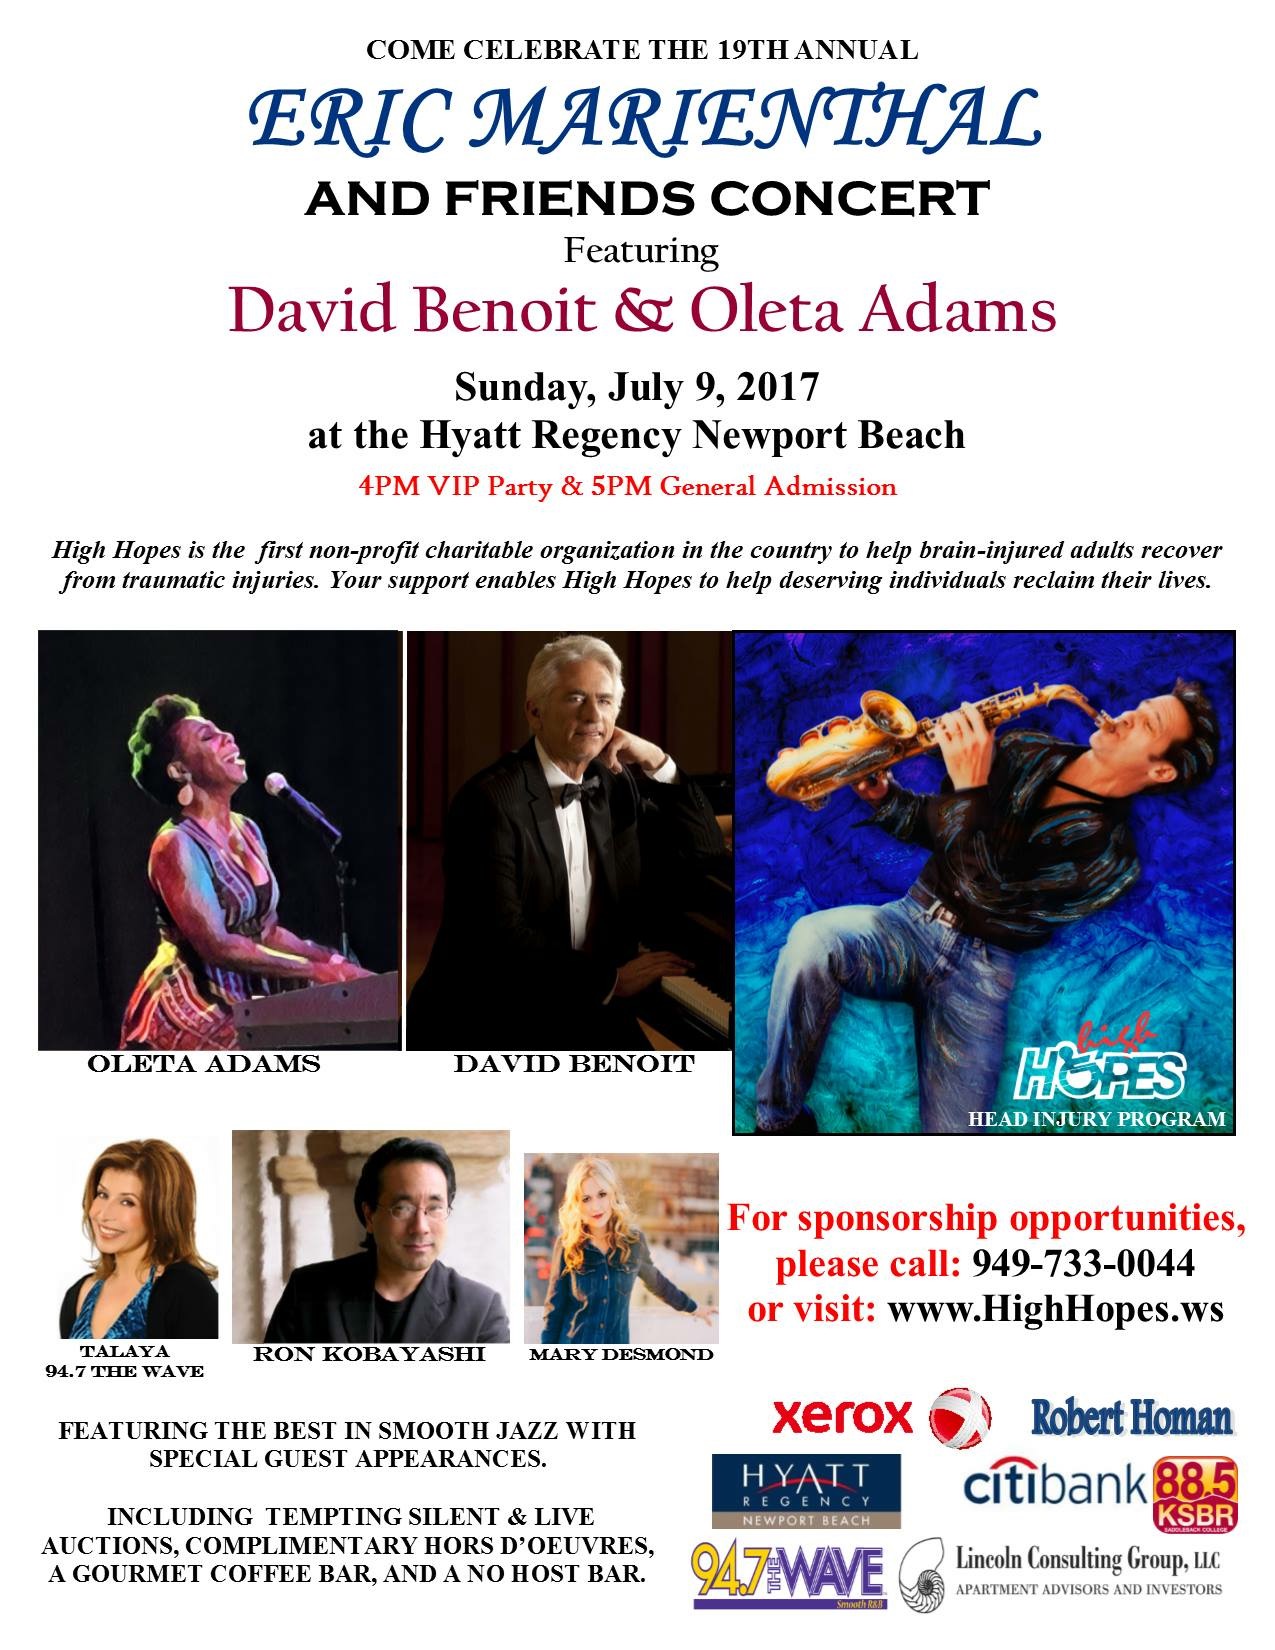 HighHopes Charity – Eric Marienthal & Friends